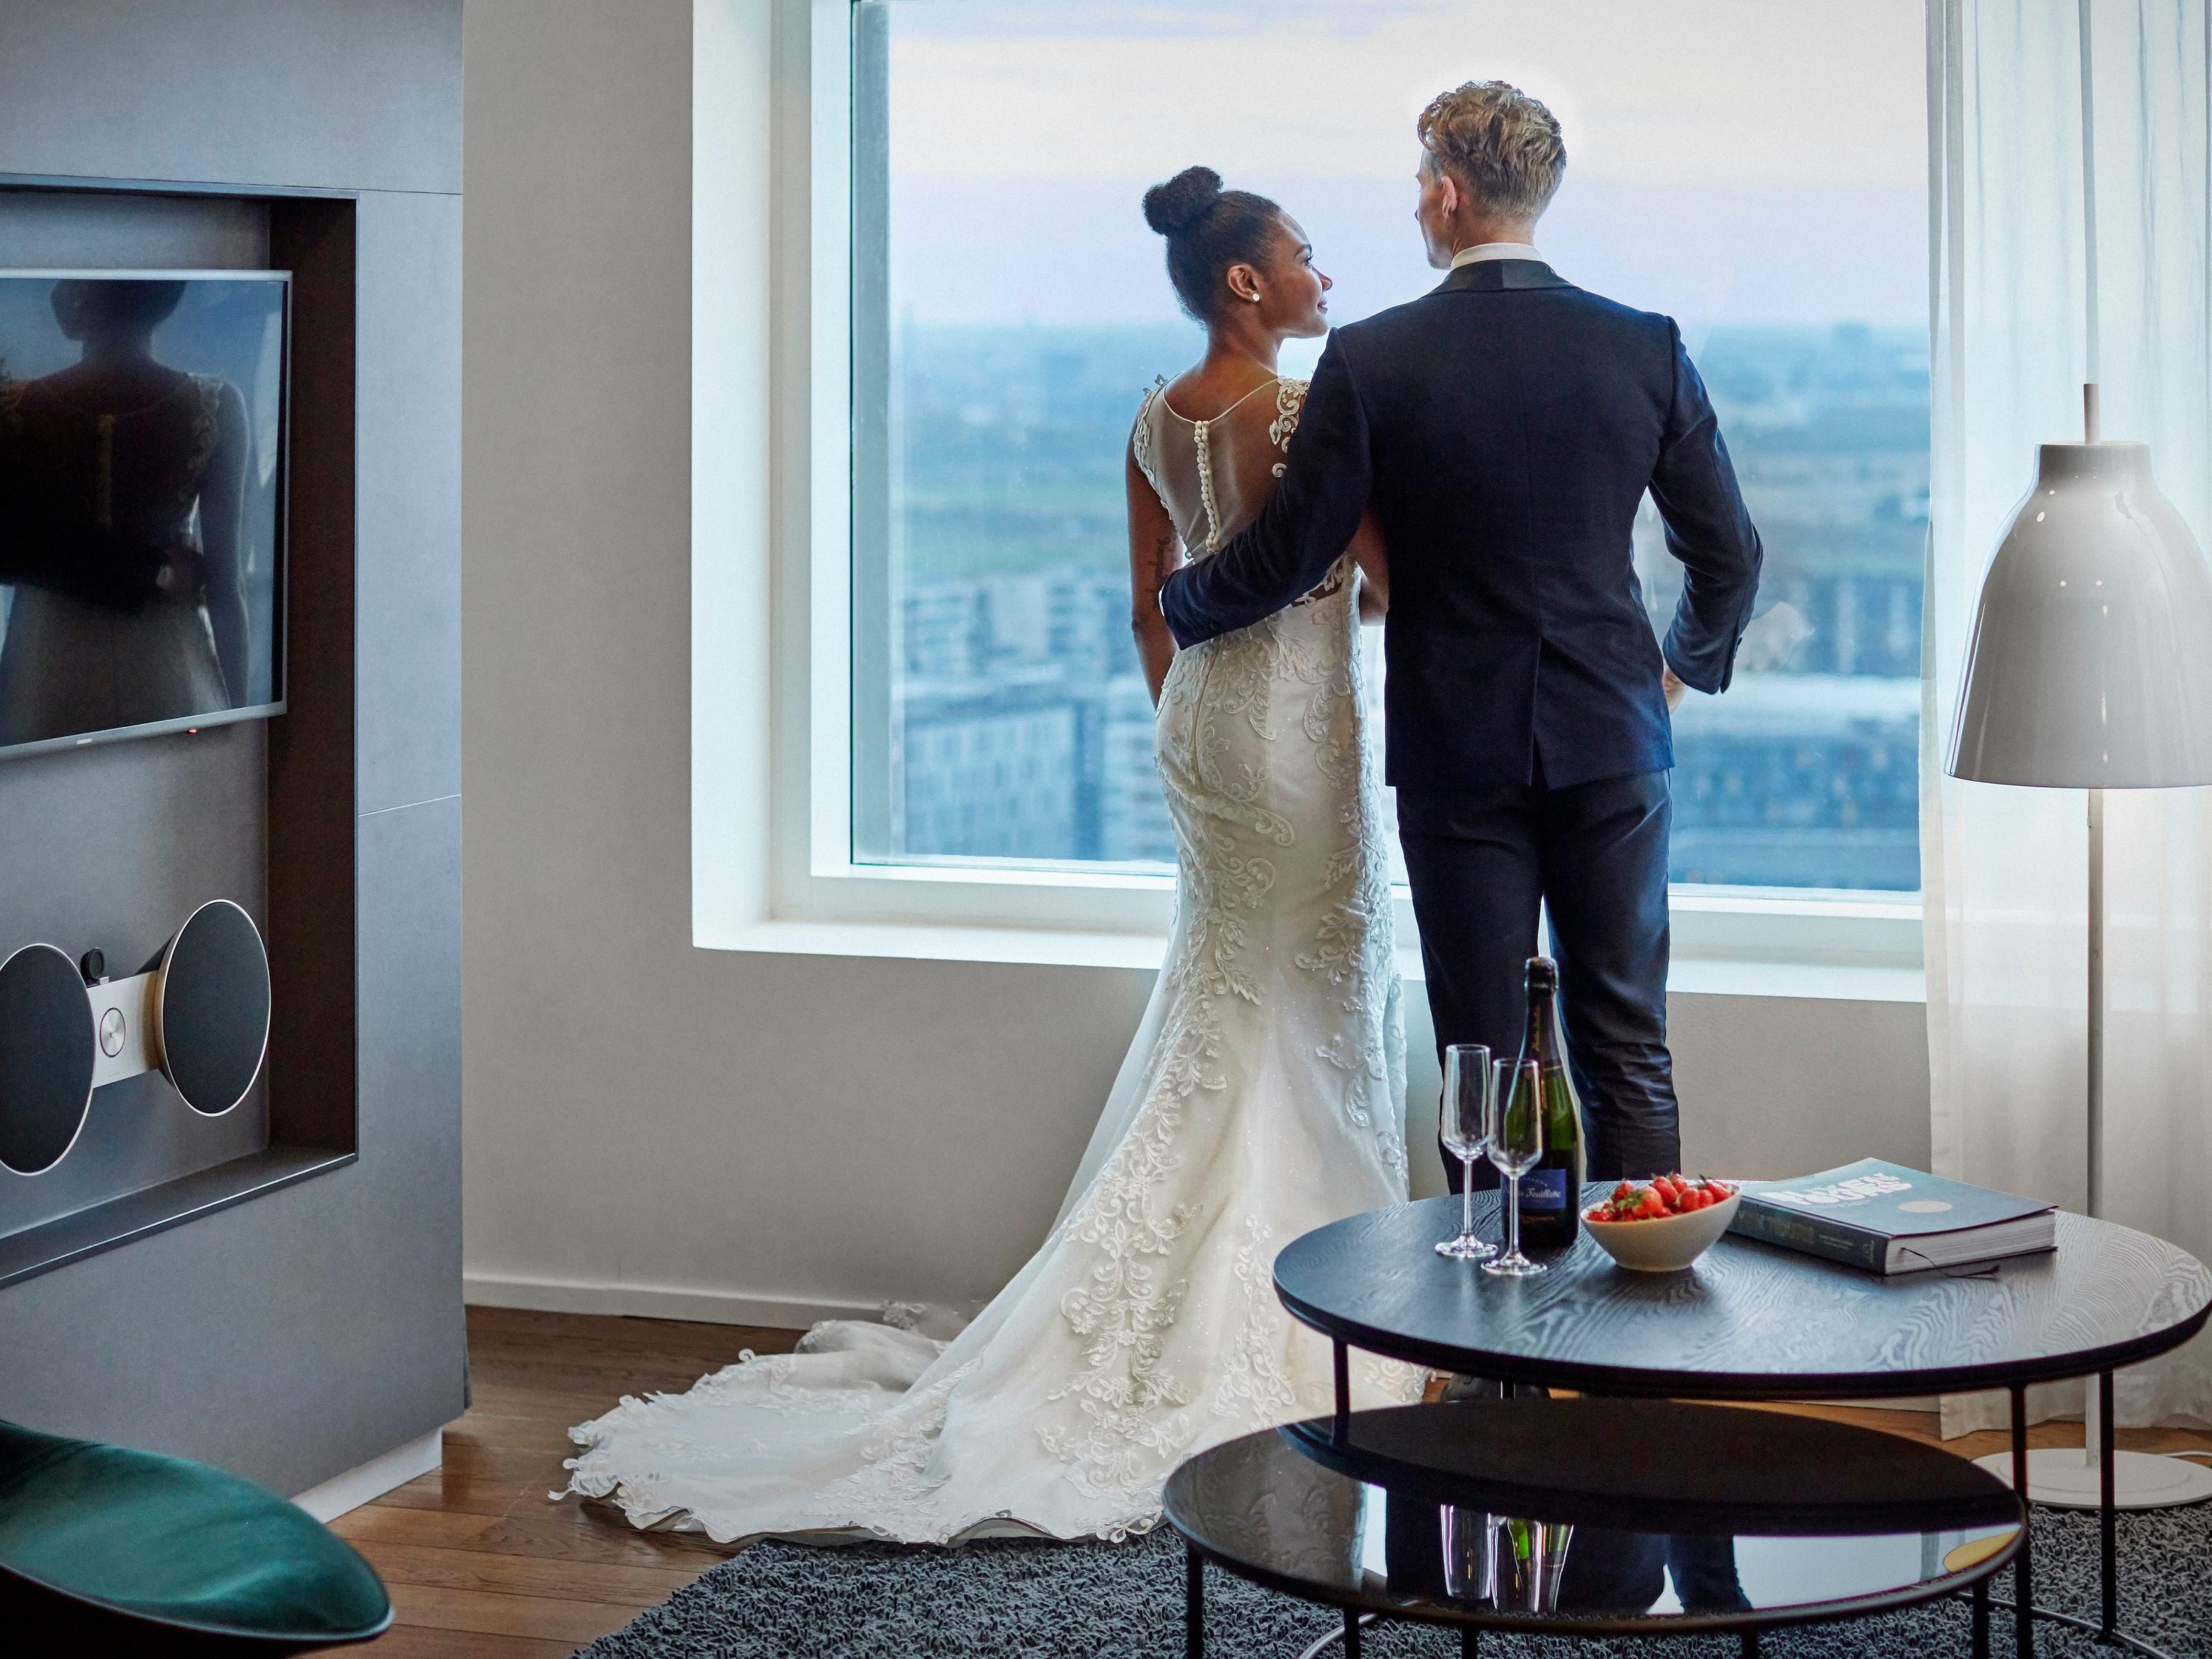 Say ”I do” in the unique surroundings of our stunning indoor forest. Our facilities include a ballroom that can be transformed to meet your needs, large rooms and suites overlooking Ørestad, a central location with a parking garage, our very own talented chefs and much more!